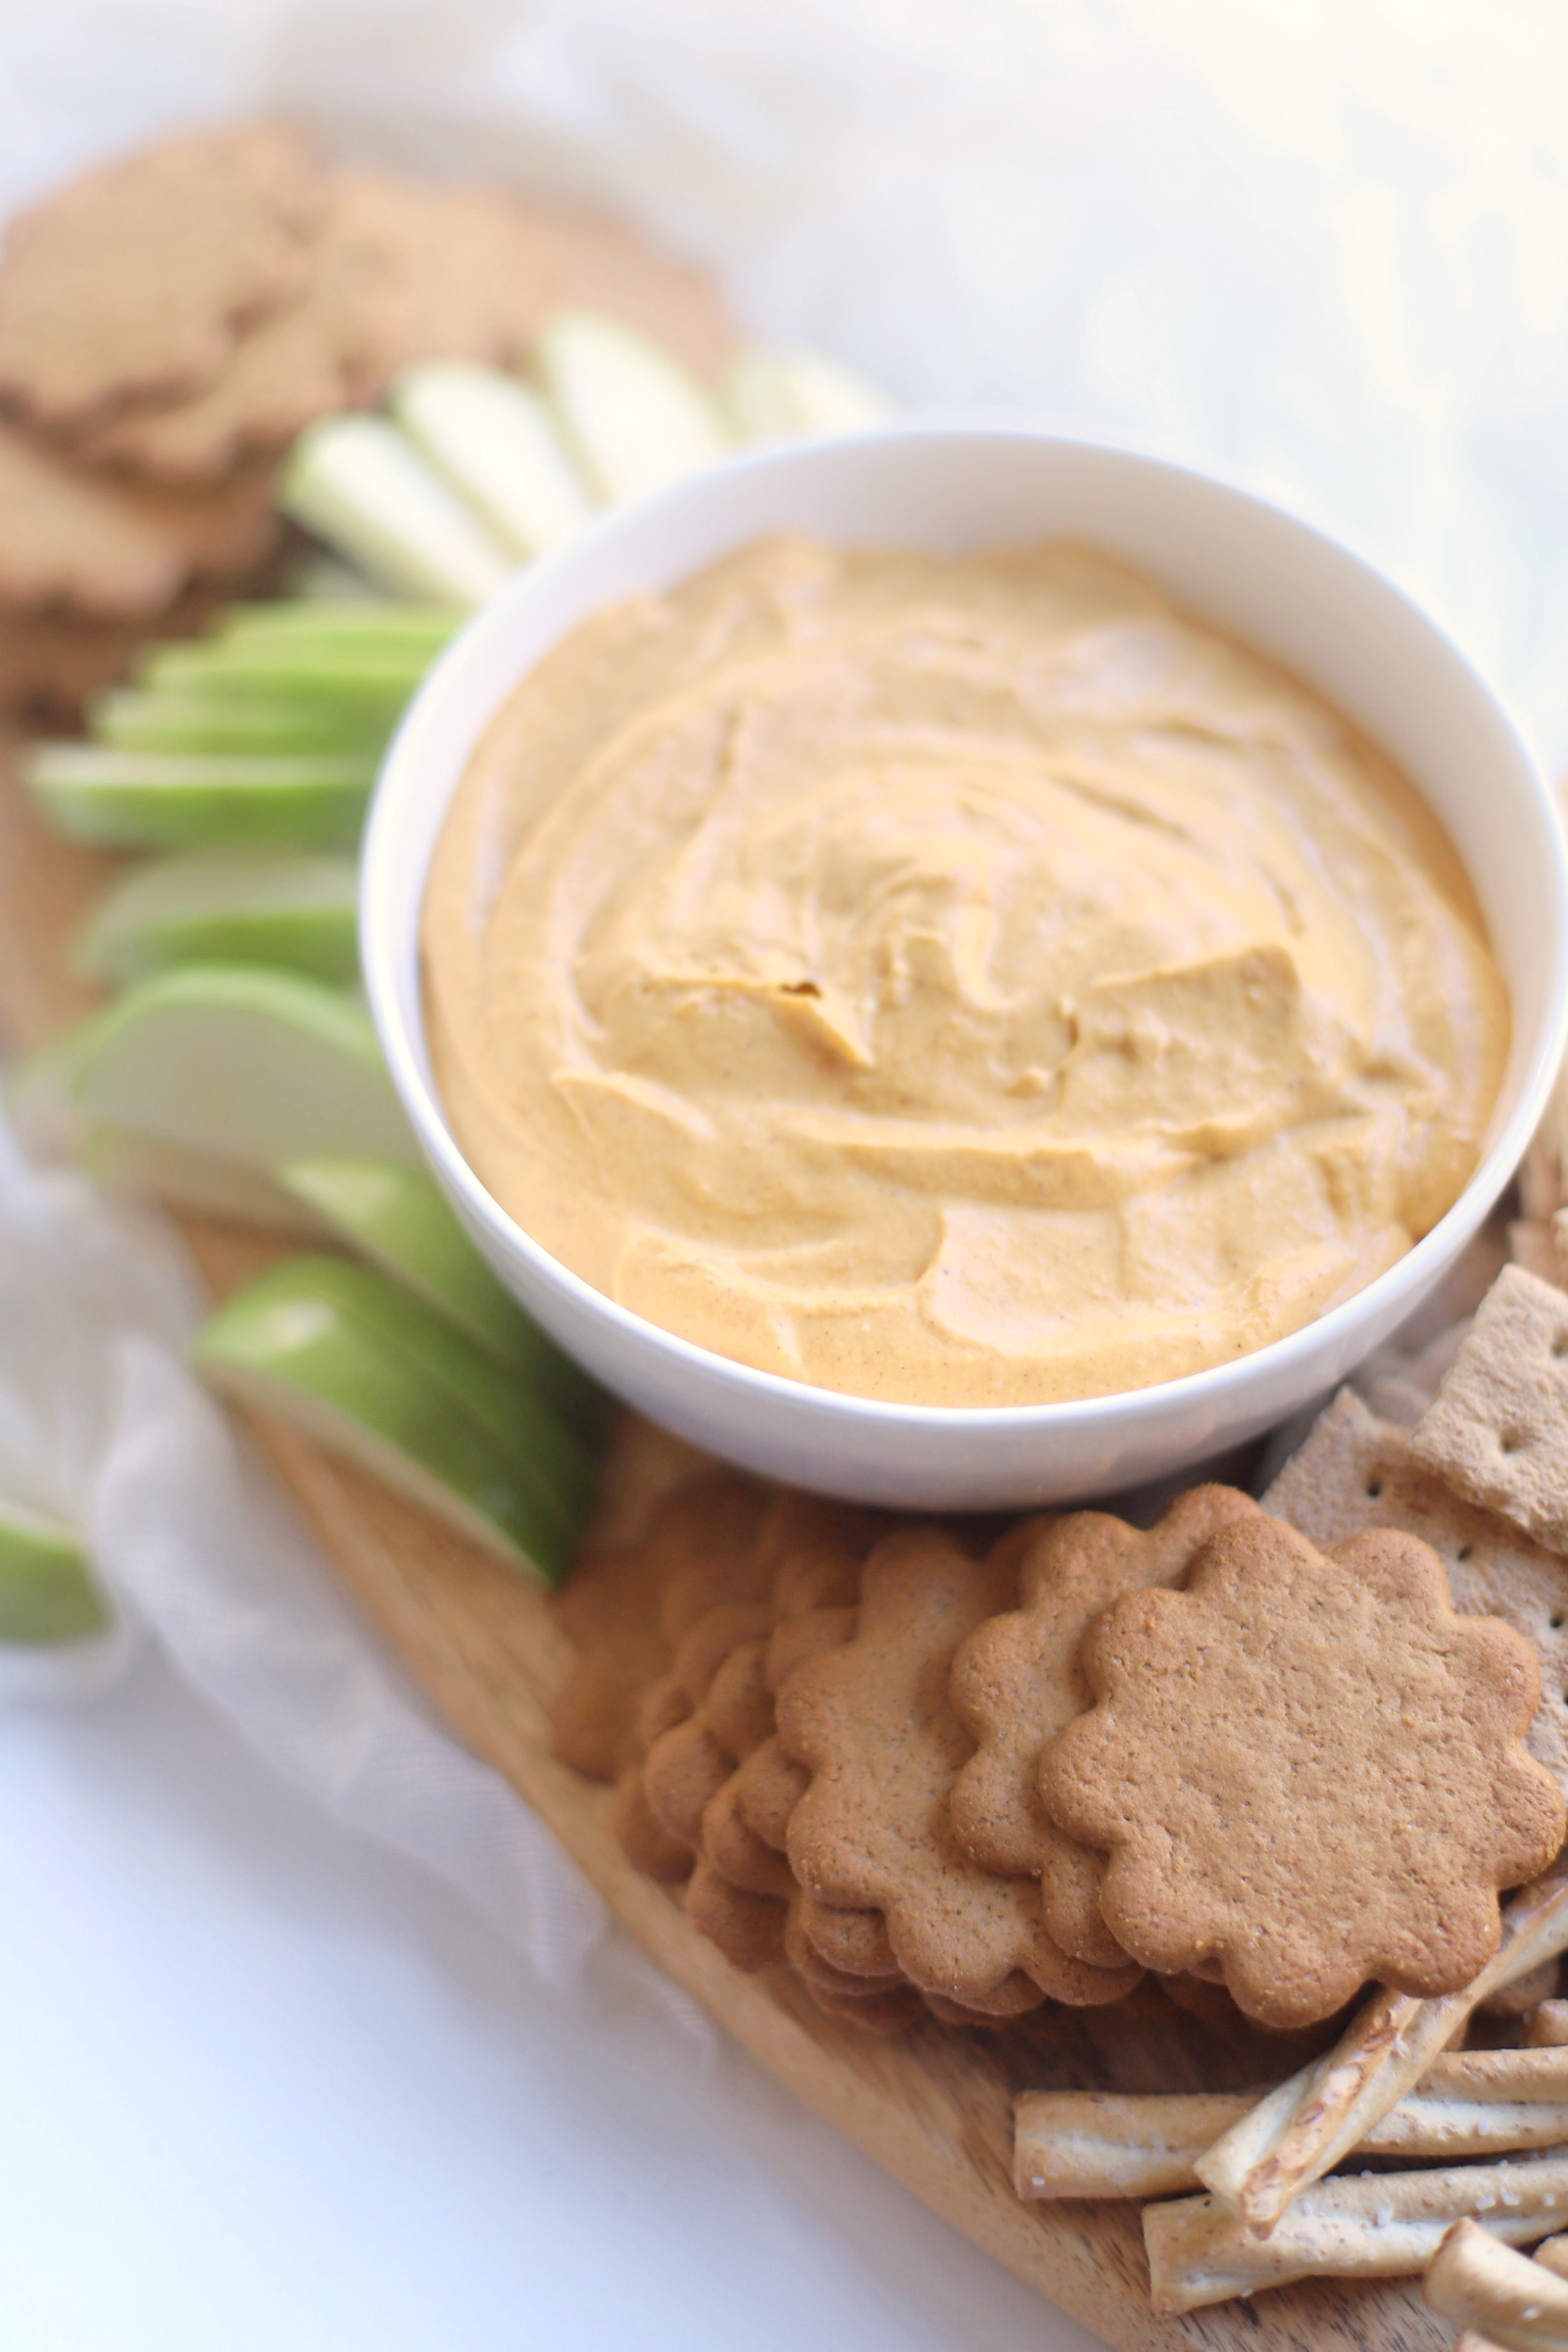 This Unbelievably Good Sweet Vegan Pumpkin Dip is basically no-bake pumpkin pie in dip form. Serve it with fresh fruit, graham crackers, ginger snaps, and pretzels for the best ever easy crowd-pleasing fall party dessert! Click through for the recipe. | glitterinc.com | @glitterinc